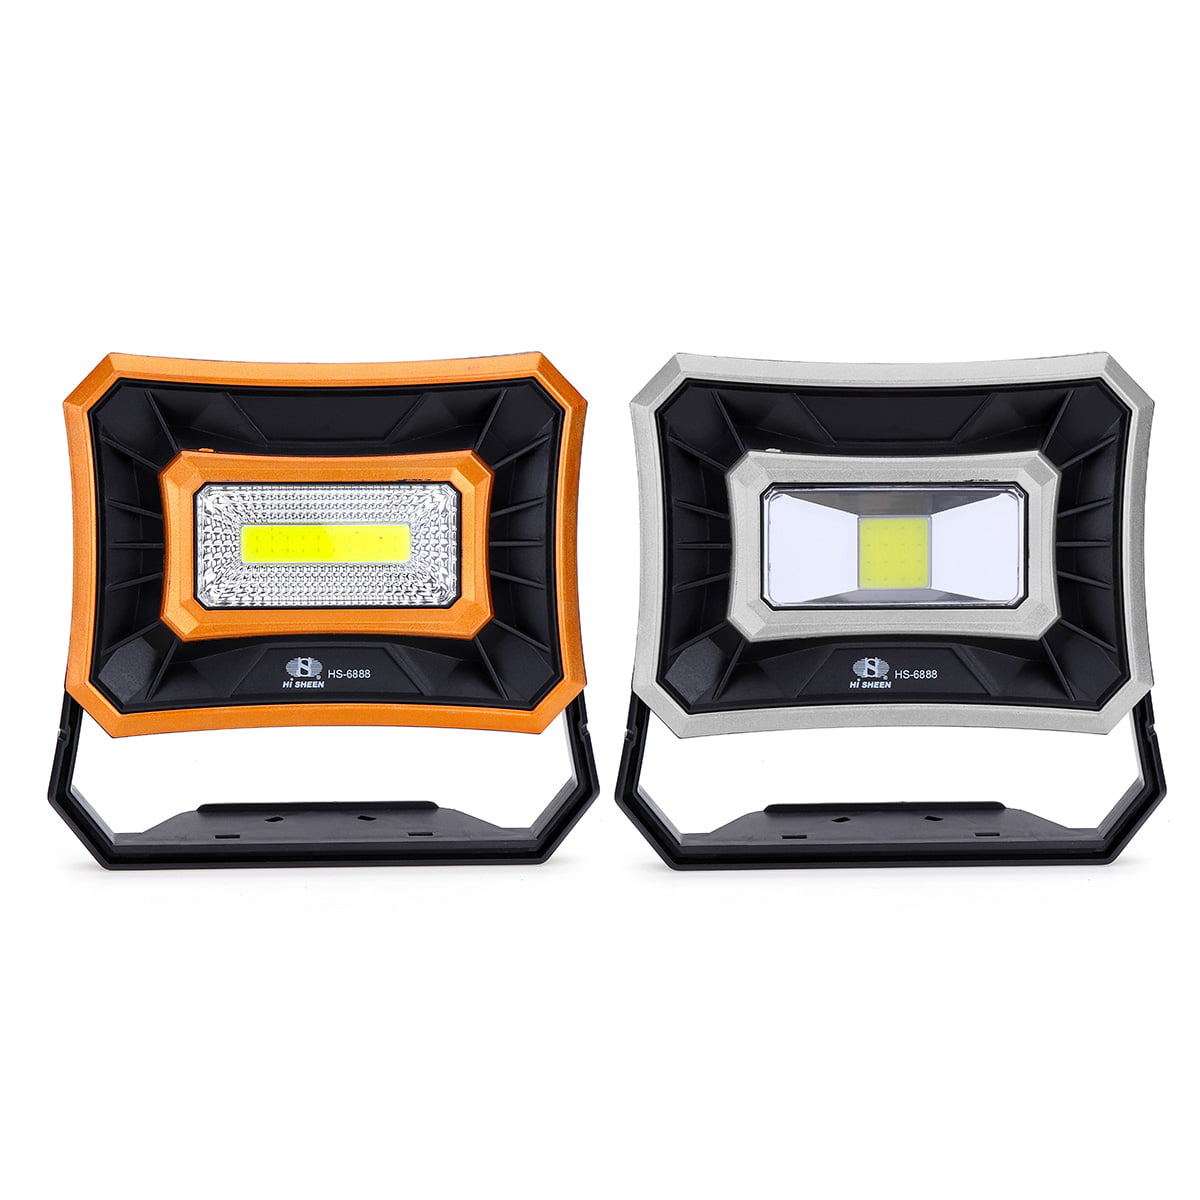 USB Rechargeable LED COB Work Light Outdoor Camping Floodlight Emergency Lamp 